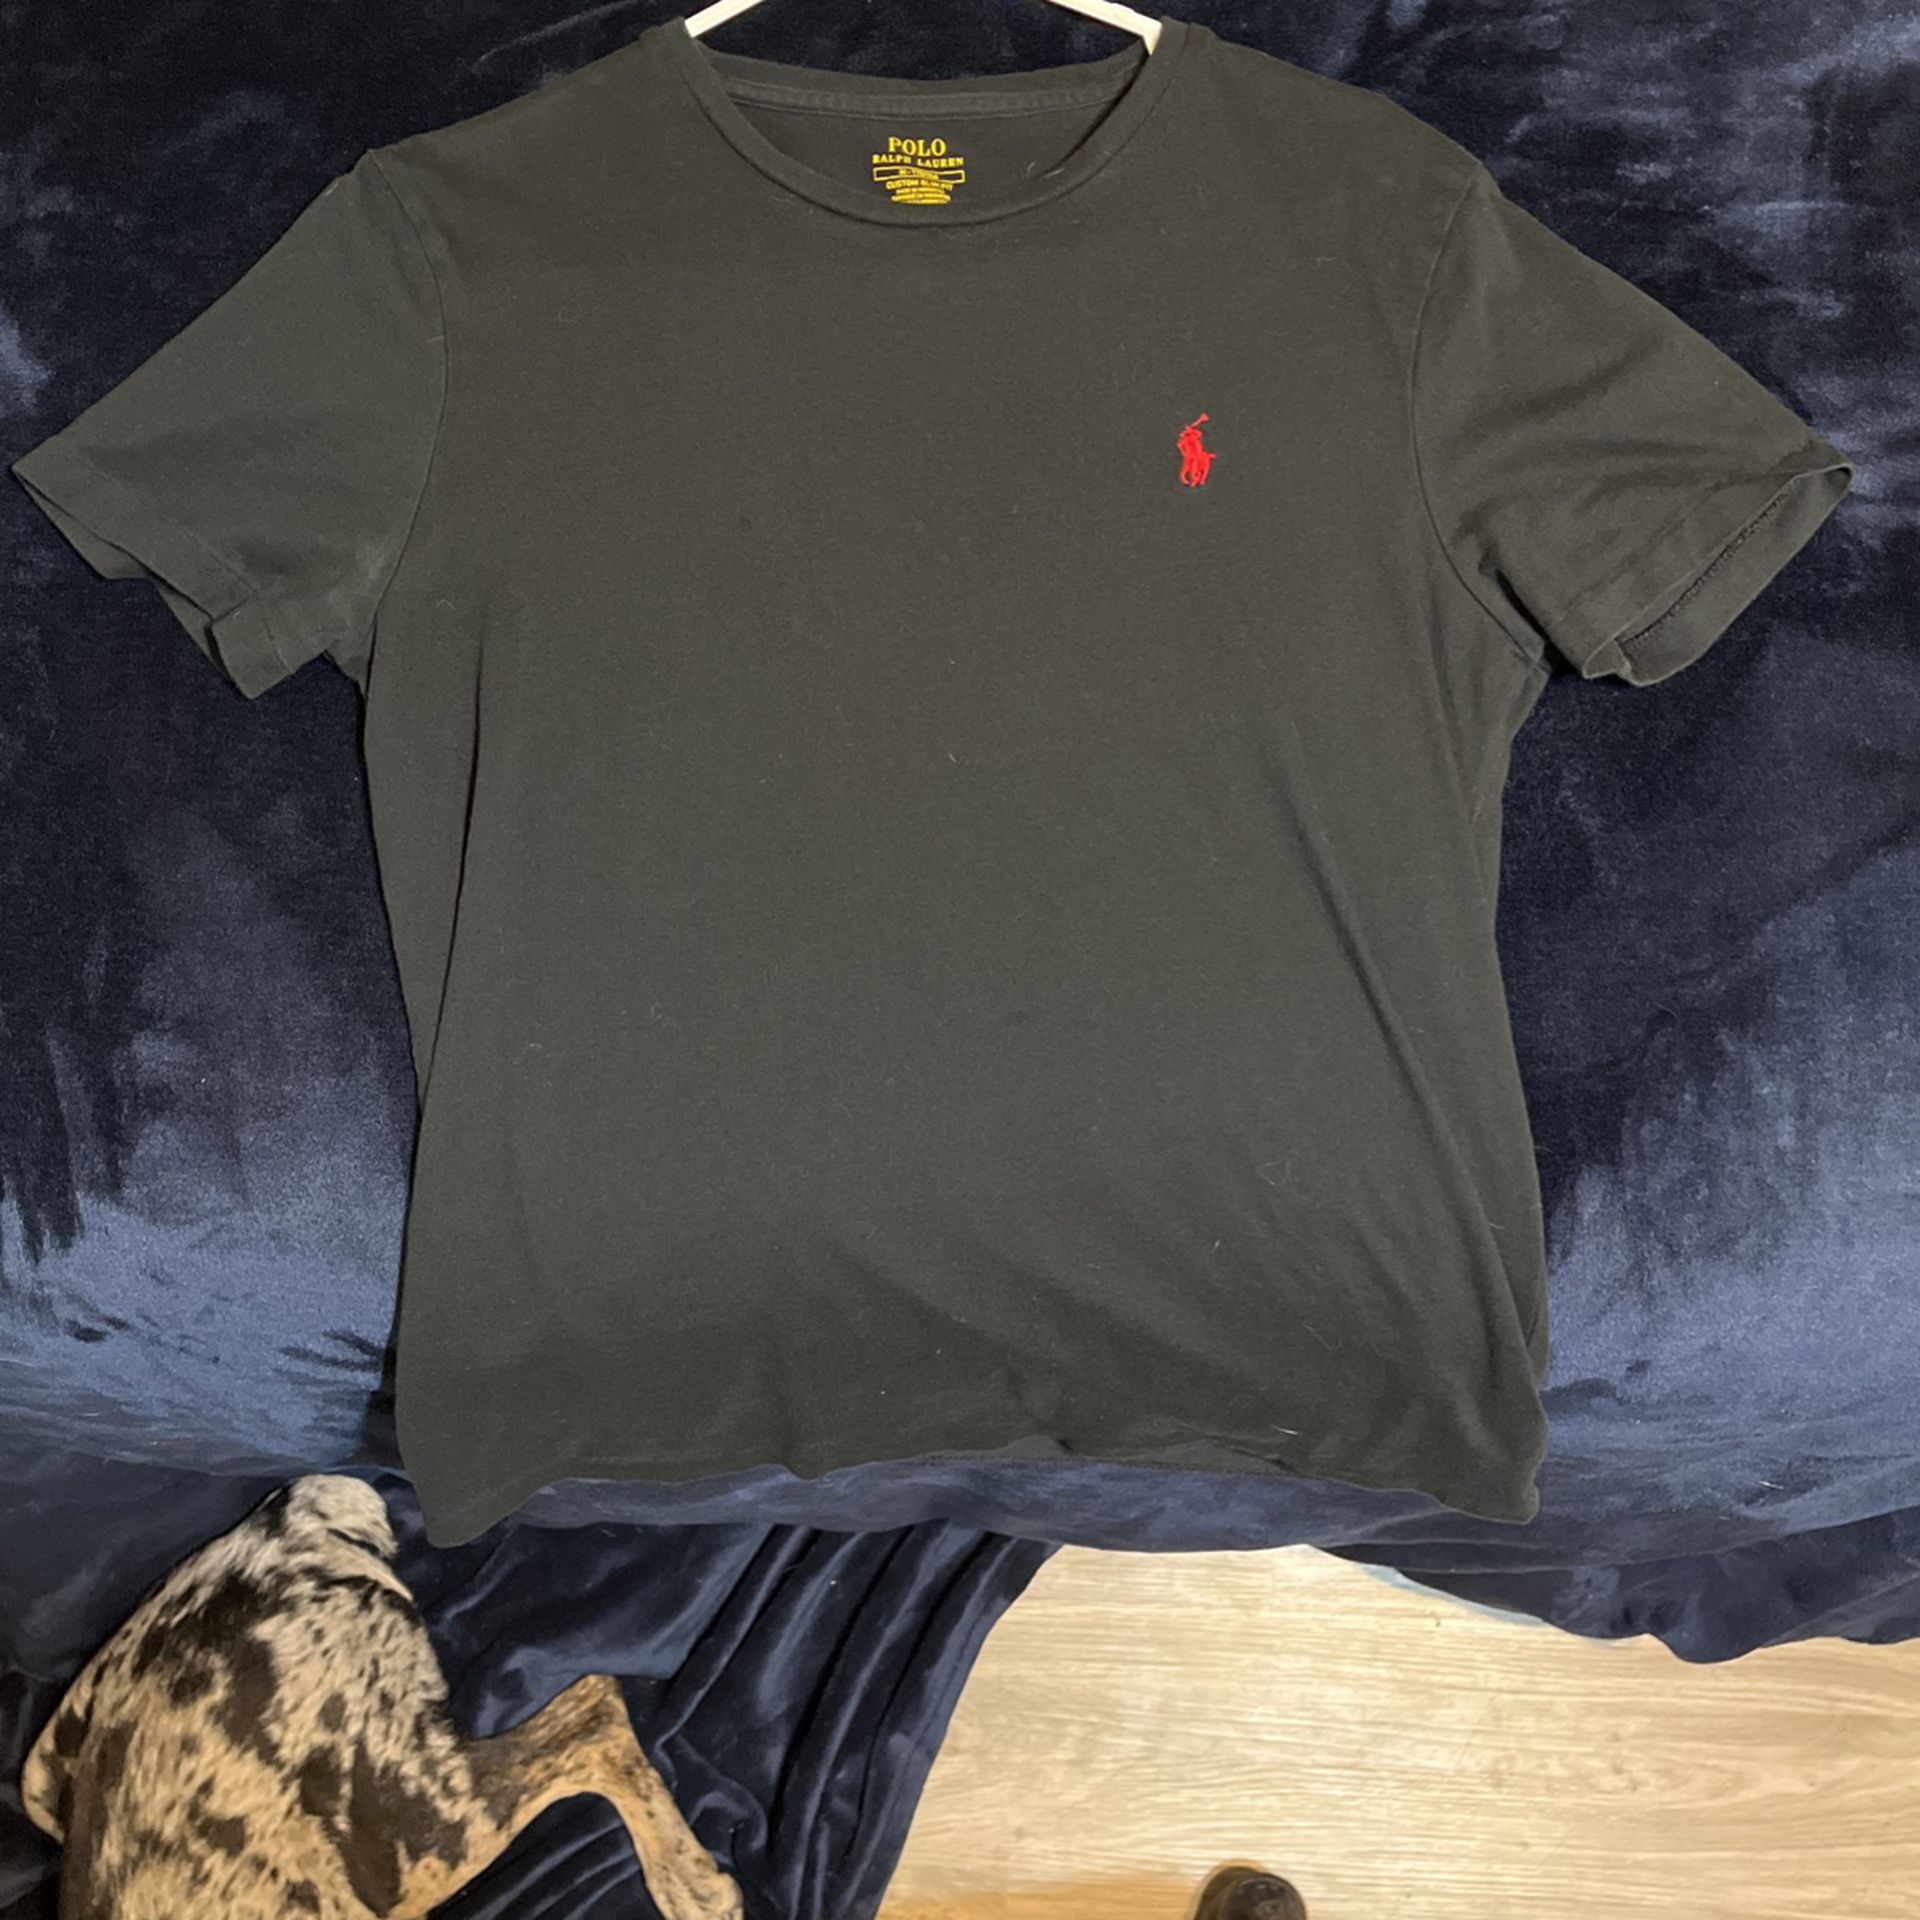 Black And Red Polo Ralph Lauren T-shirt